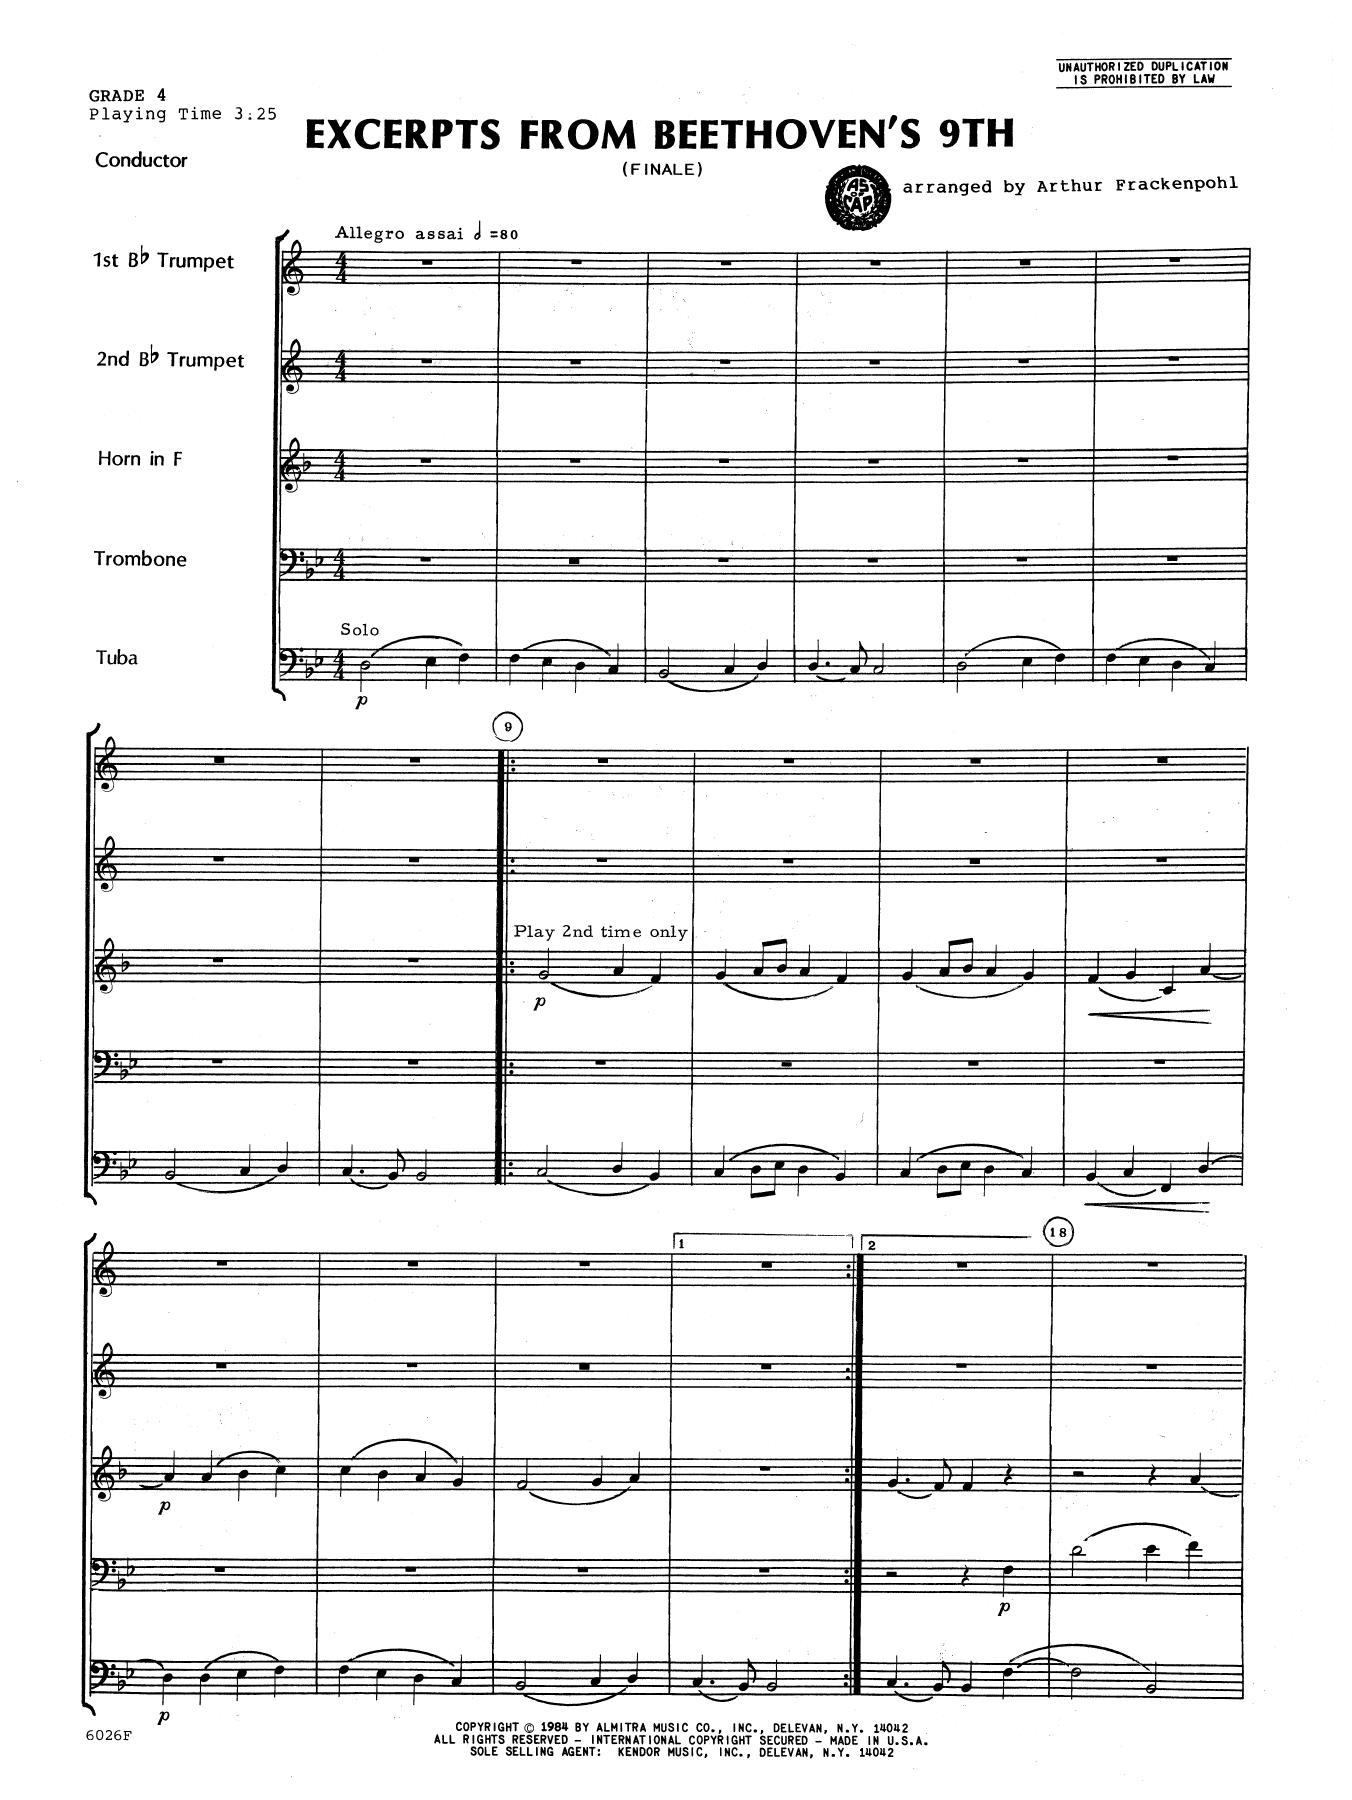 Download Arthur Frackenpohl Excerpts From Beethoven's 9th - Full Sc Sheet Music